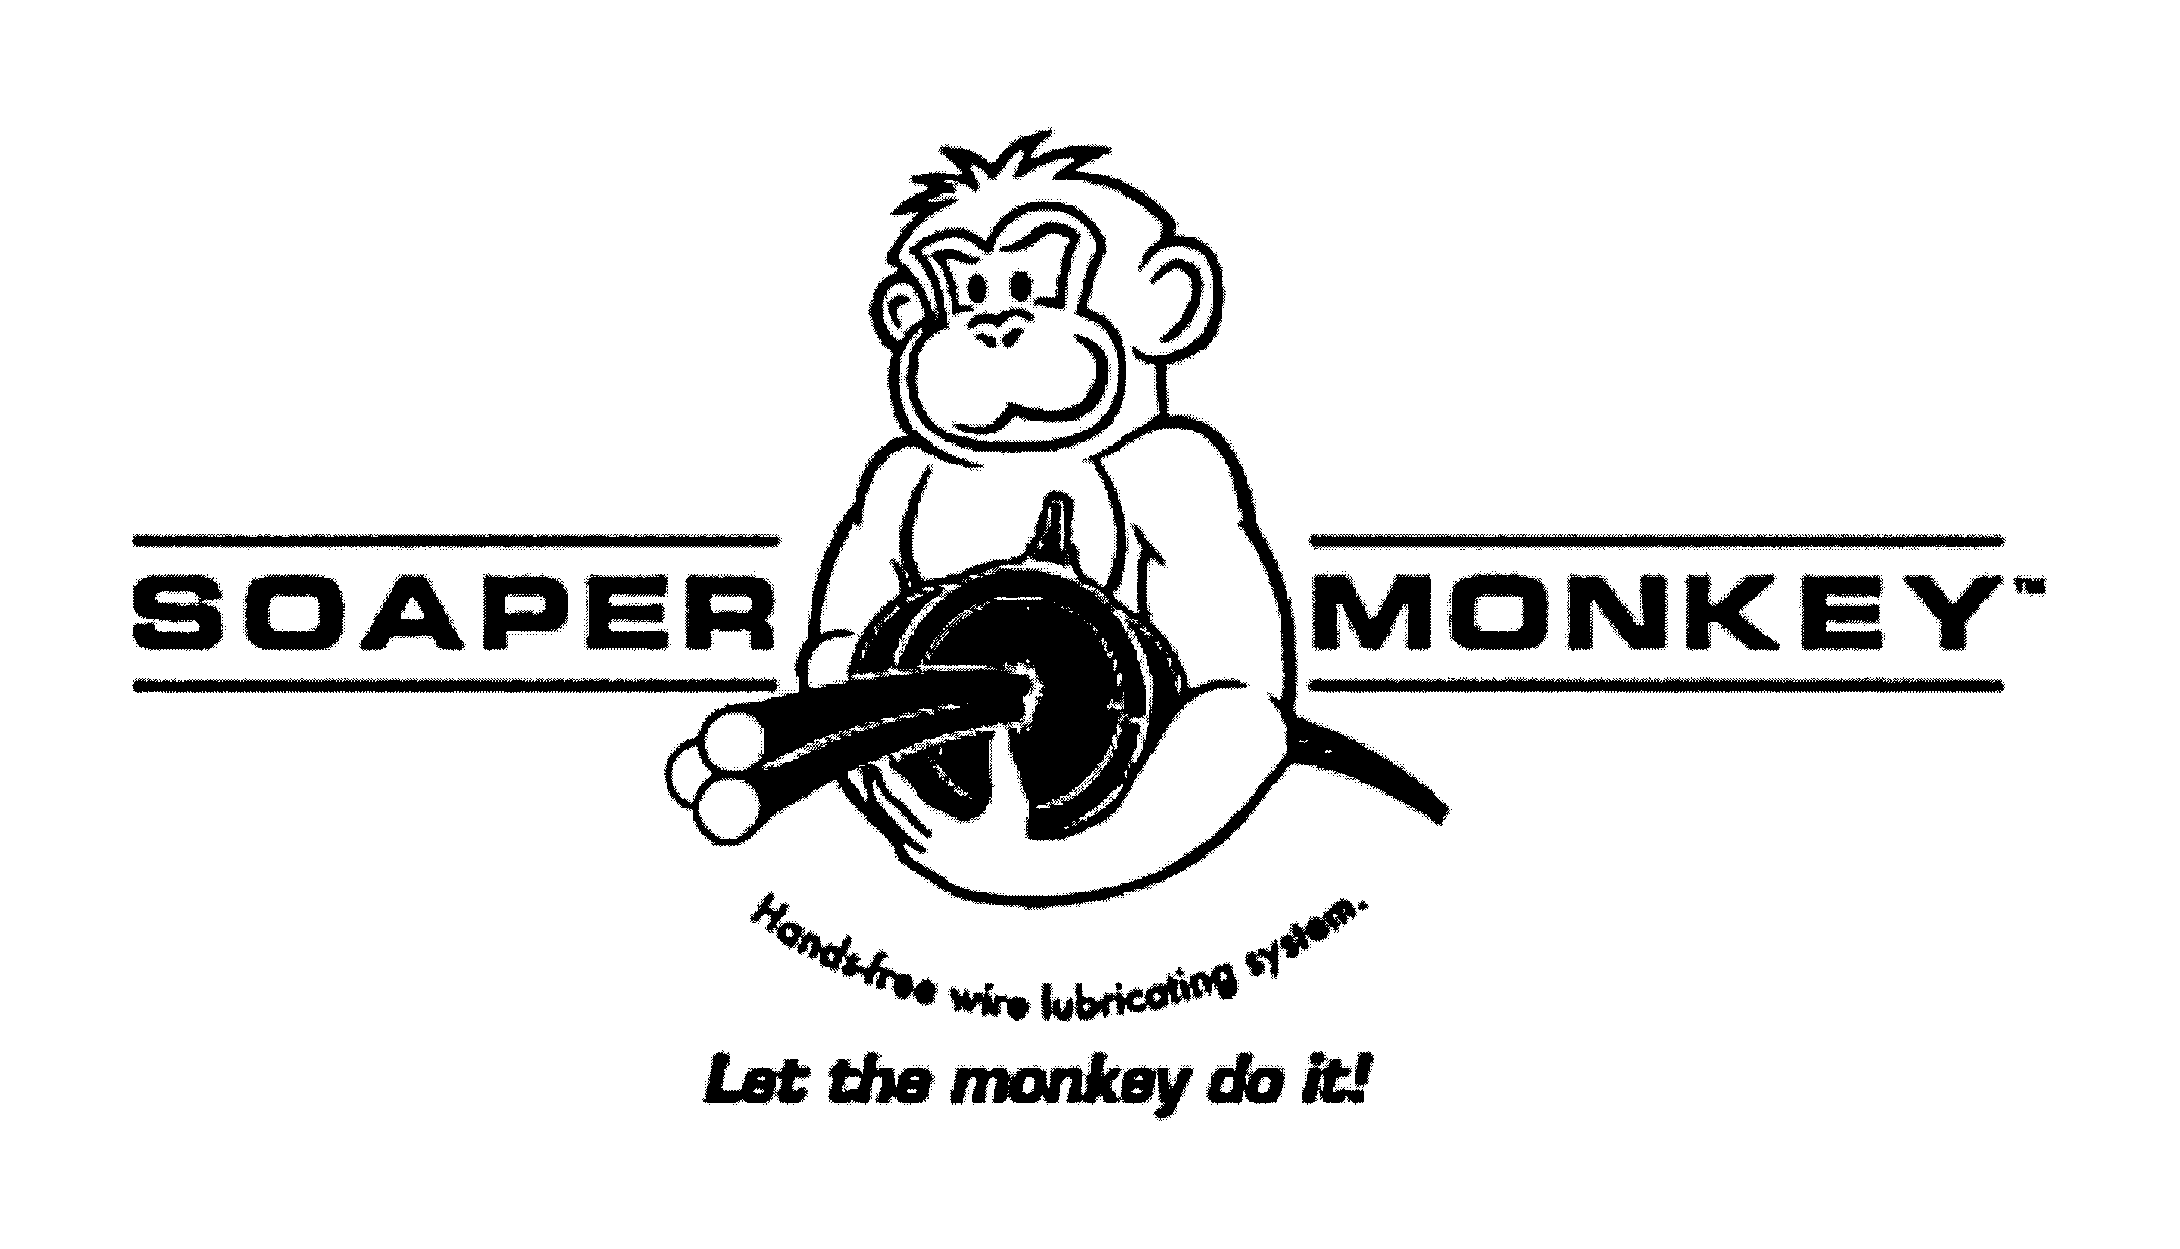 Trademark Logo SOAPER MONKEY HANDS-FREE WIRE LUBRICATING SYSTEM. LET THE MONKEY DO IT!